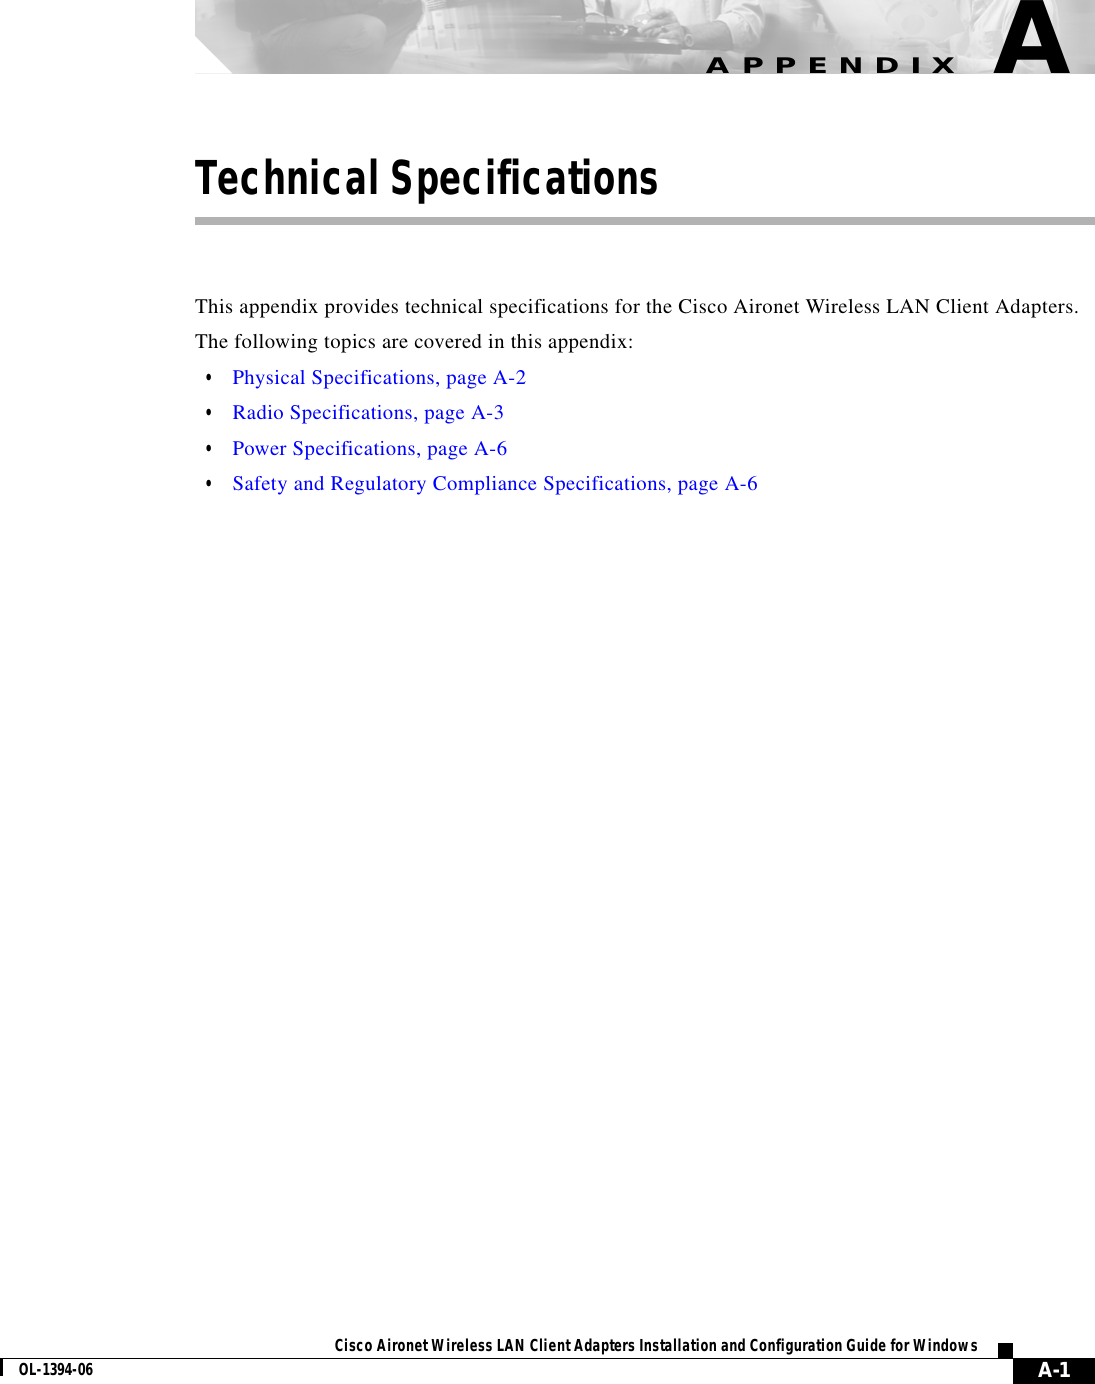 A-1Cisco Aironet Wireless LAN Client Adapters Installation and Configuration Guide for WindowsOL-1394-06APPENDIXATechnical SpecificationsThis appendix provides technical specifications for the Cisco Aironet Wireless LAN Client Adapters.The following topics are covered in this appendix:•Physical Specifications, page A-2•Radio Specifications, page A-3•Power Specifications, page A-6•Safety and Regulatory Compliance Specifications, page A-6